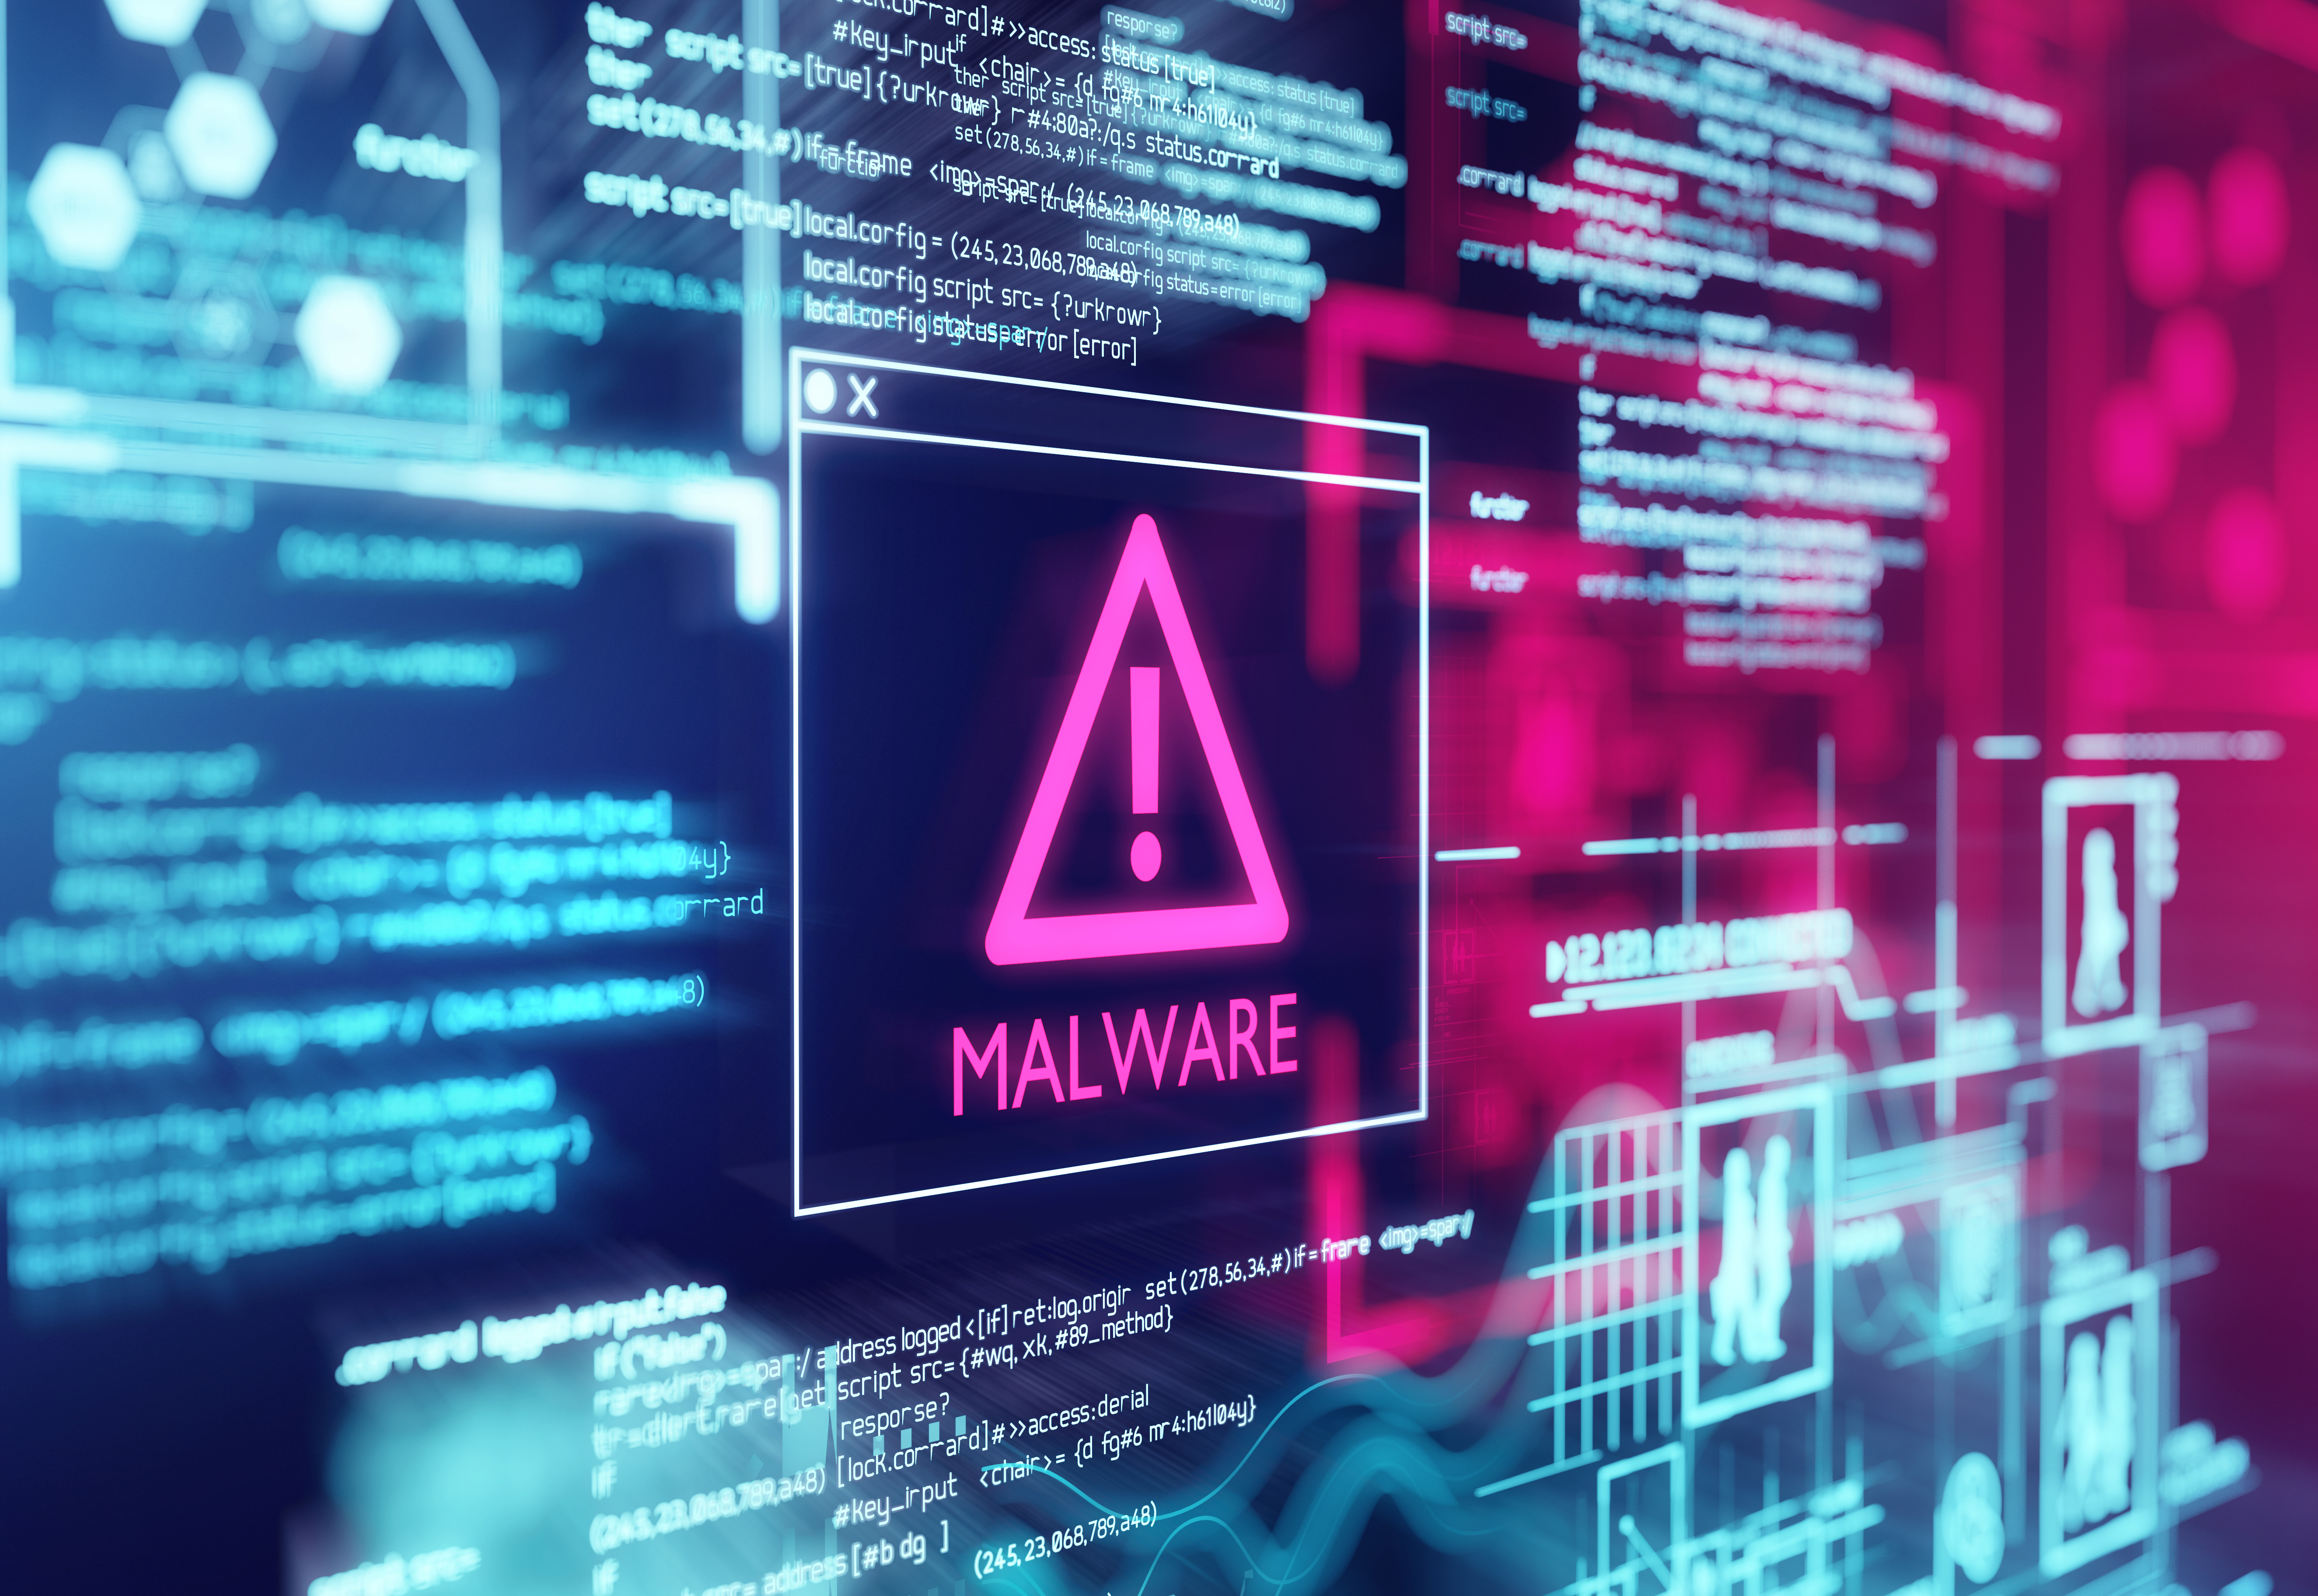 8 Types of Malware Attacks and How to Avoid Them